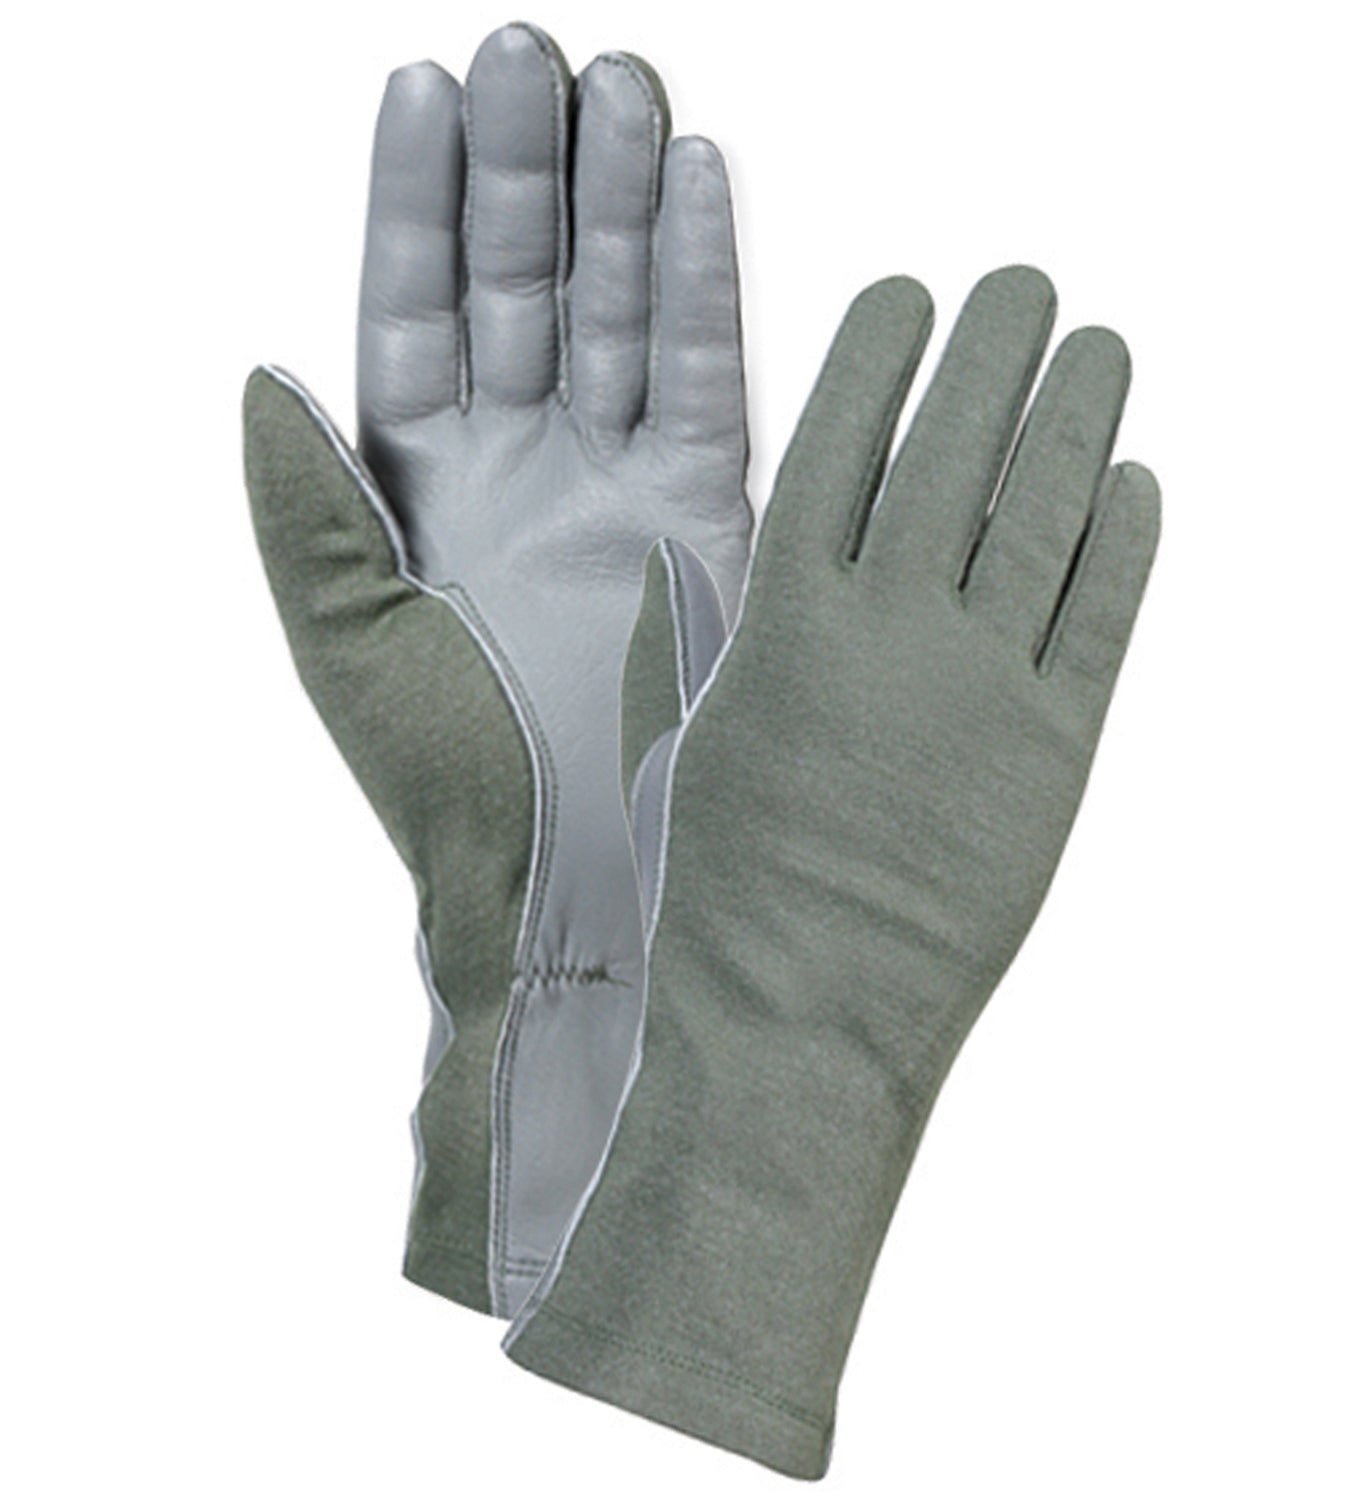 Milspec G.I. Type Flame & Heat Resistant Flight Gloves Holiday Closeout Deals MilTac Tactical Military Outdoor Gear Australia